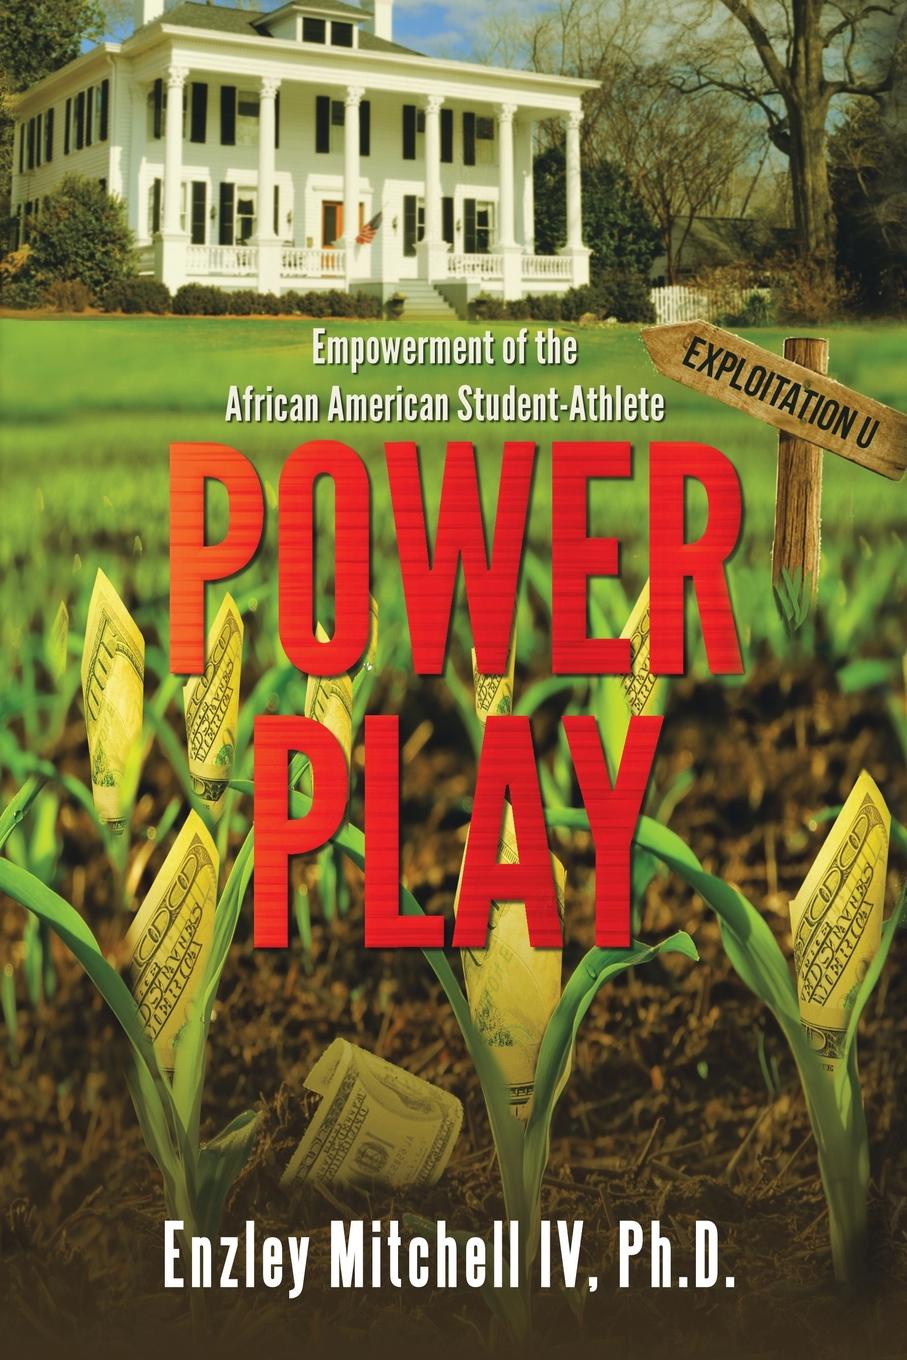 Ph.D. Enzley Mitchell IV Power Play. Empowerment of the African American Student-Athlete